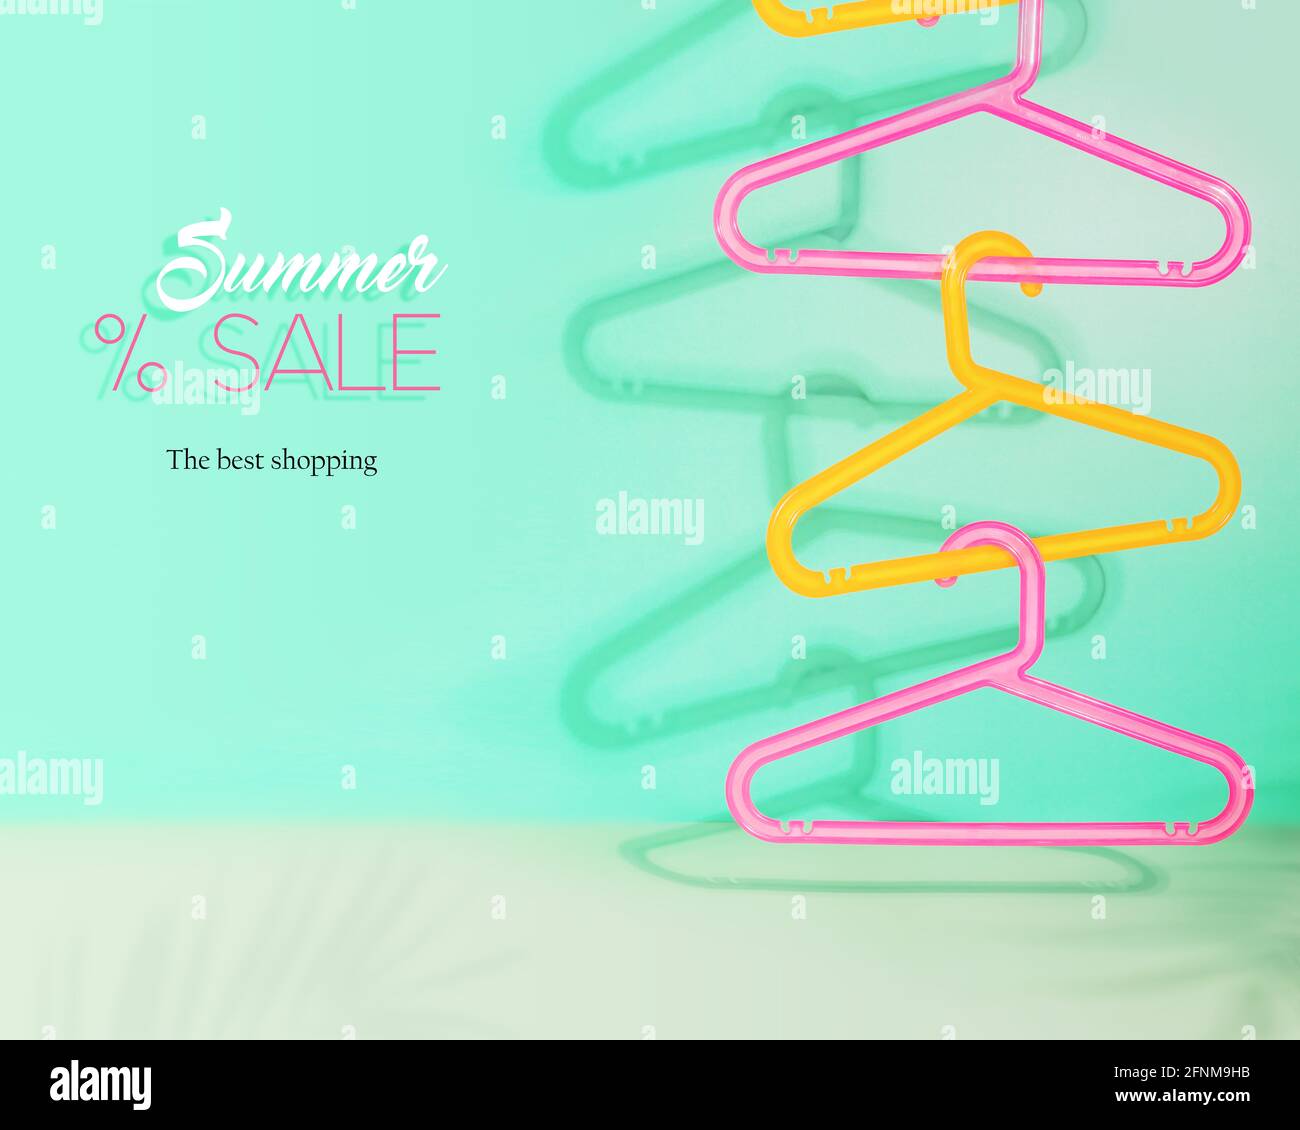 Horizontal summer sale composition with colored plastic hangers hung on top of each other on a light blue background with shadows and text Stock Photo